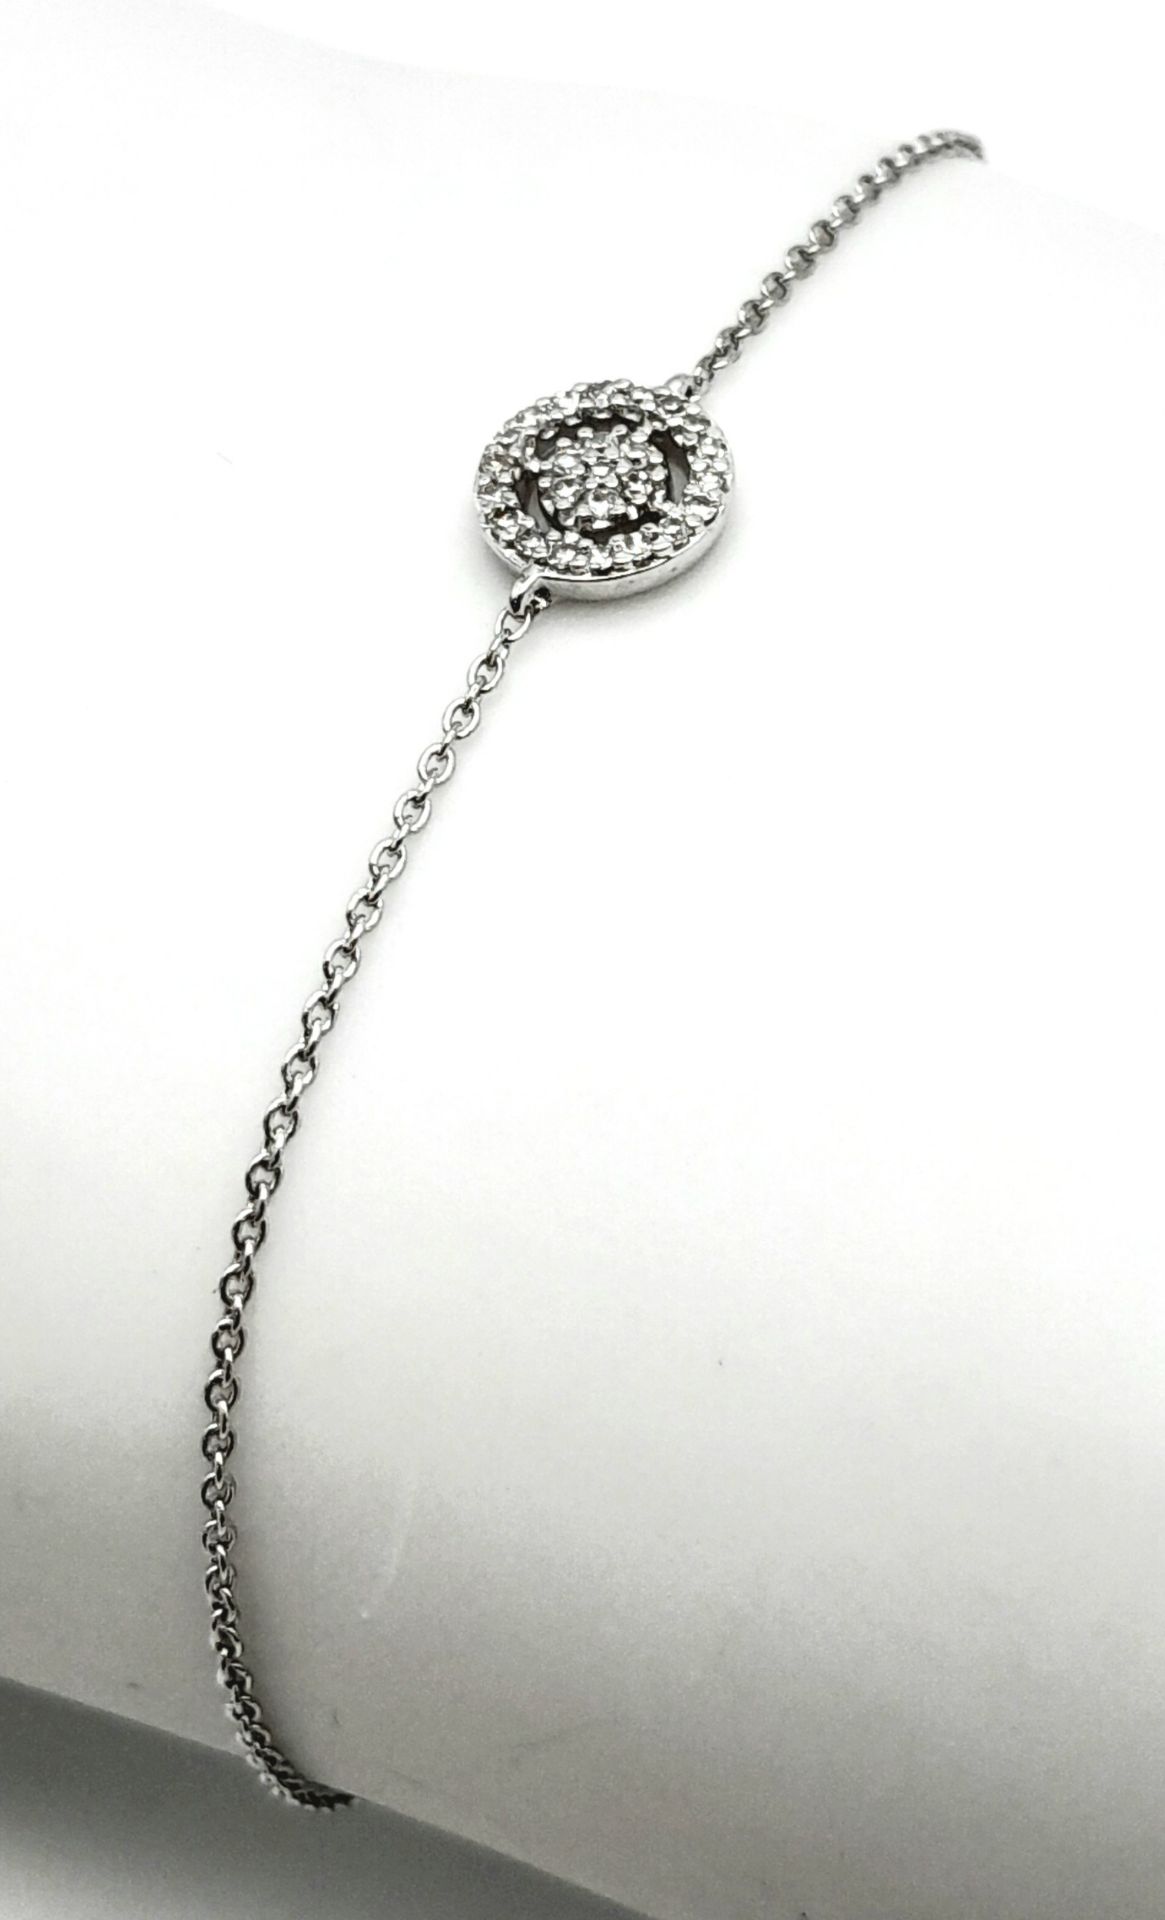 A 14K White Gold Delicate Bracelet with Diamond Accents. 16cm. 1.35g total weight. Ref: 16862 - Image 3 of 5